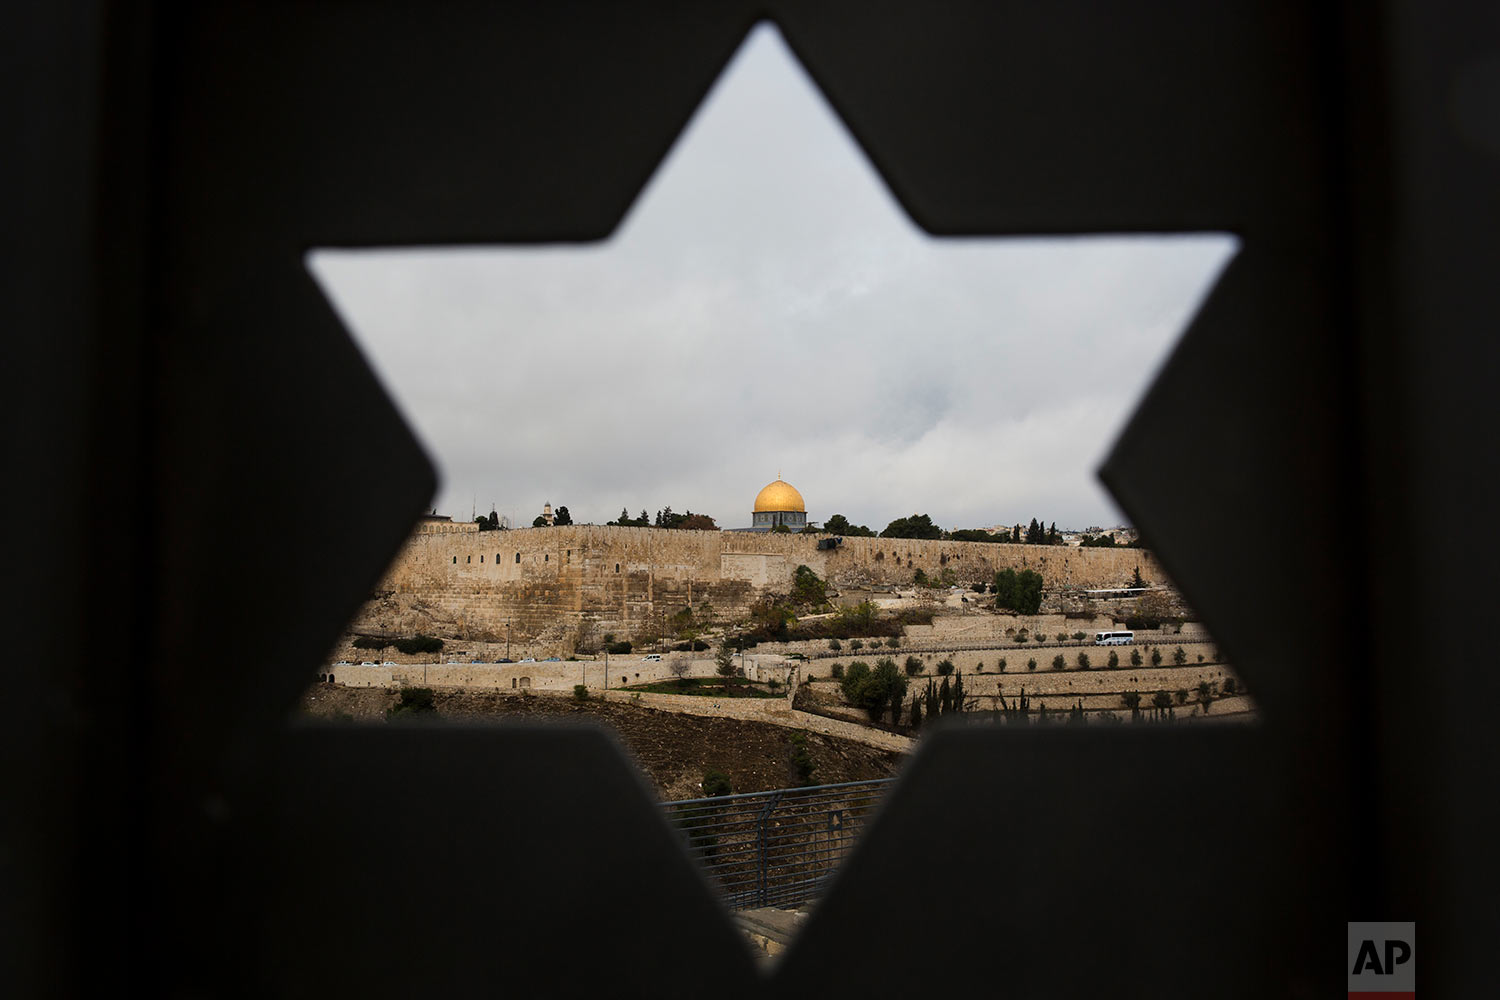  Jerusalem Old City is seen trough a door with the shape of star of David, in Jerusalem, Wednesday, Dec. 6, 2017. U.S. officials say President Donald Trump will recognize Jerusalem as Israel's capital Wednesday, Dec. 6, and instruct the State Department to begin the multi-year process of moving the American embassy from Tel Aviv to the holy city. His decision could have deep repercussions across the region. (AP Photo/Oded Balilty) 